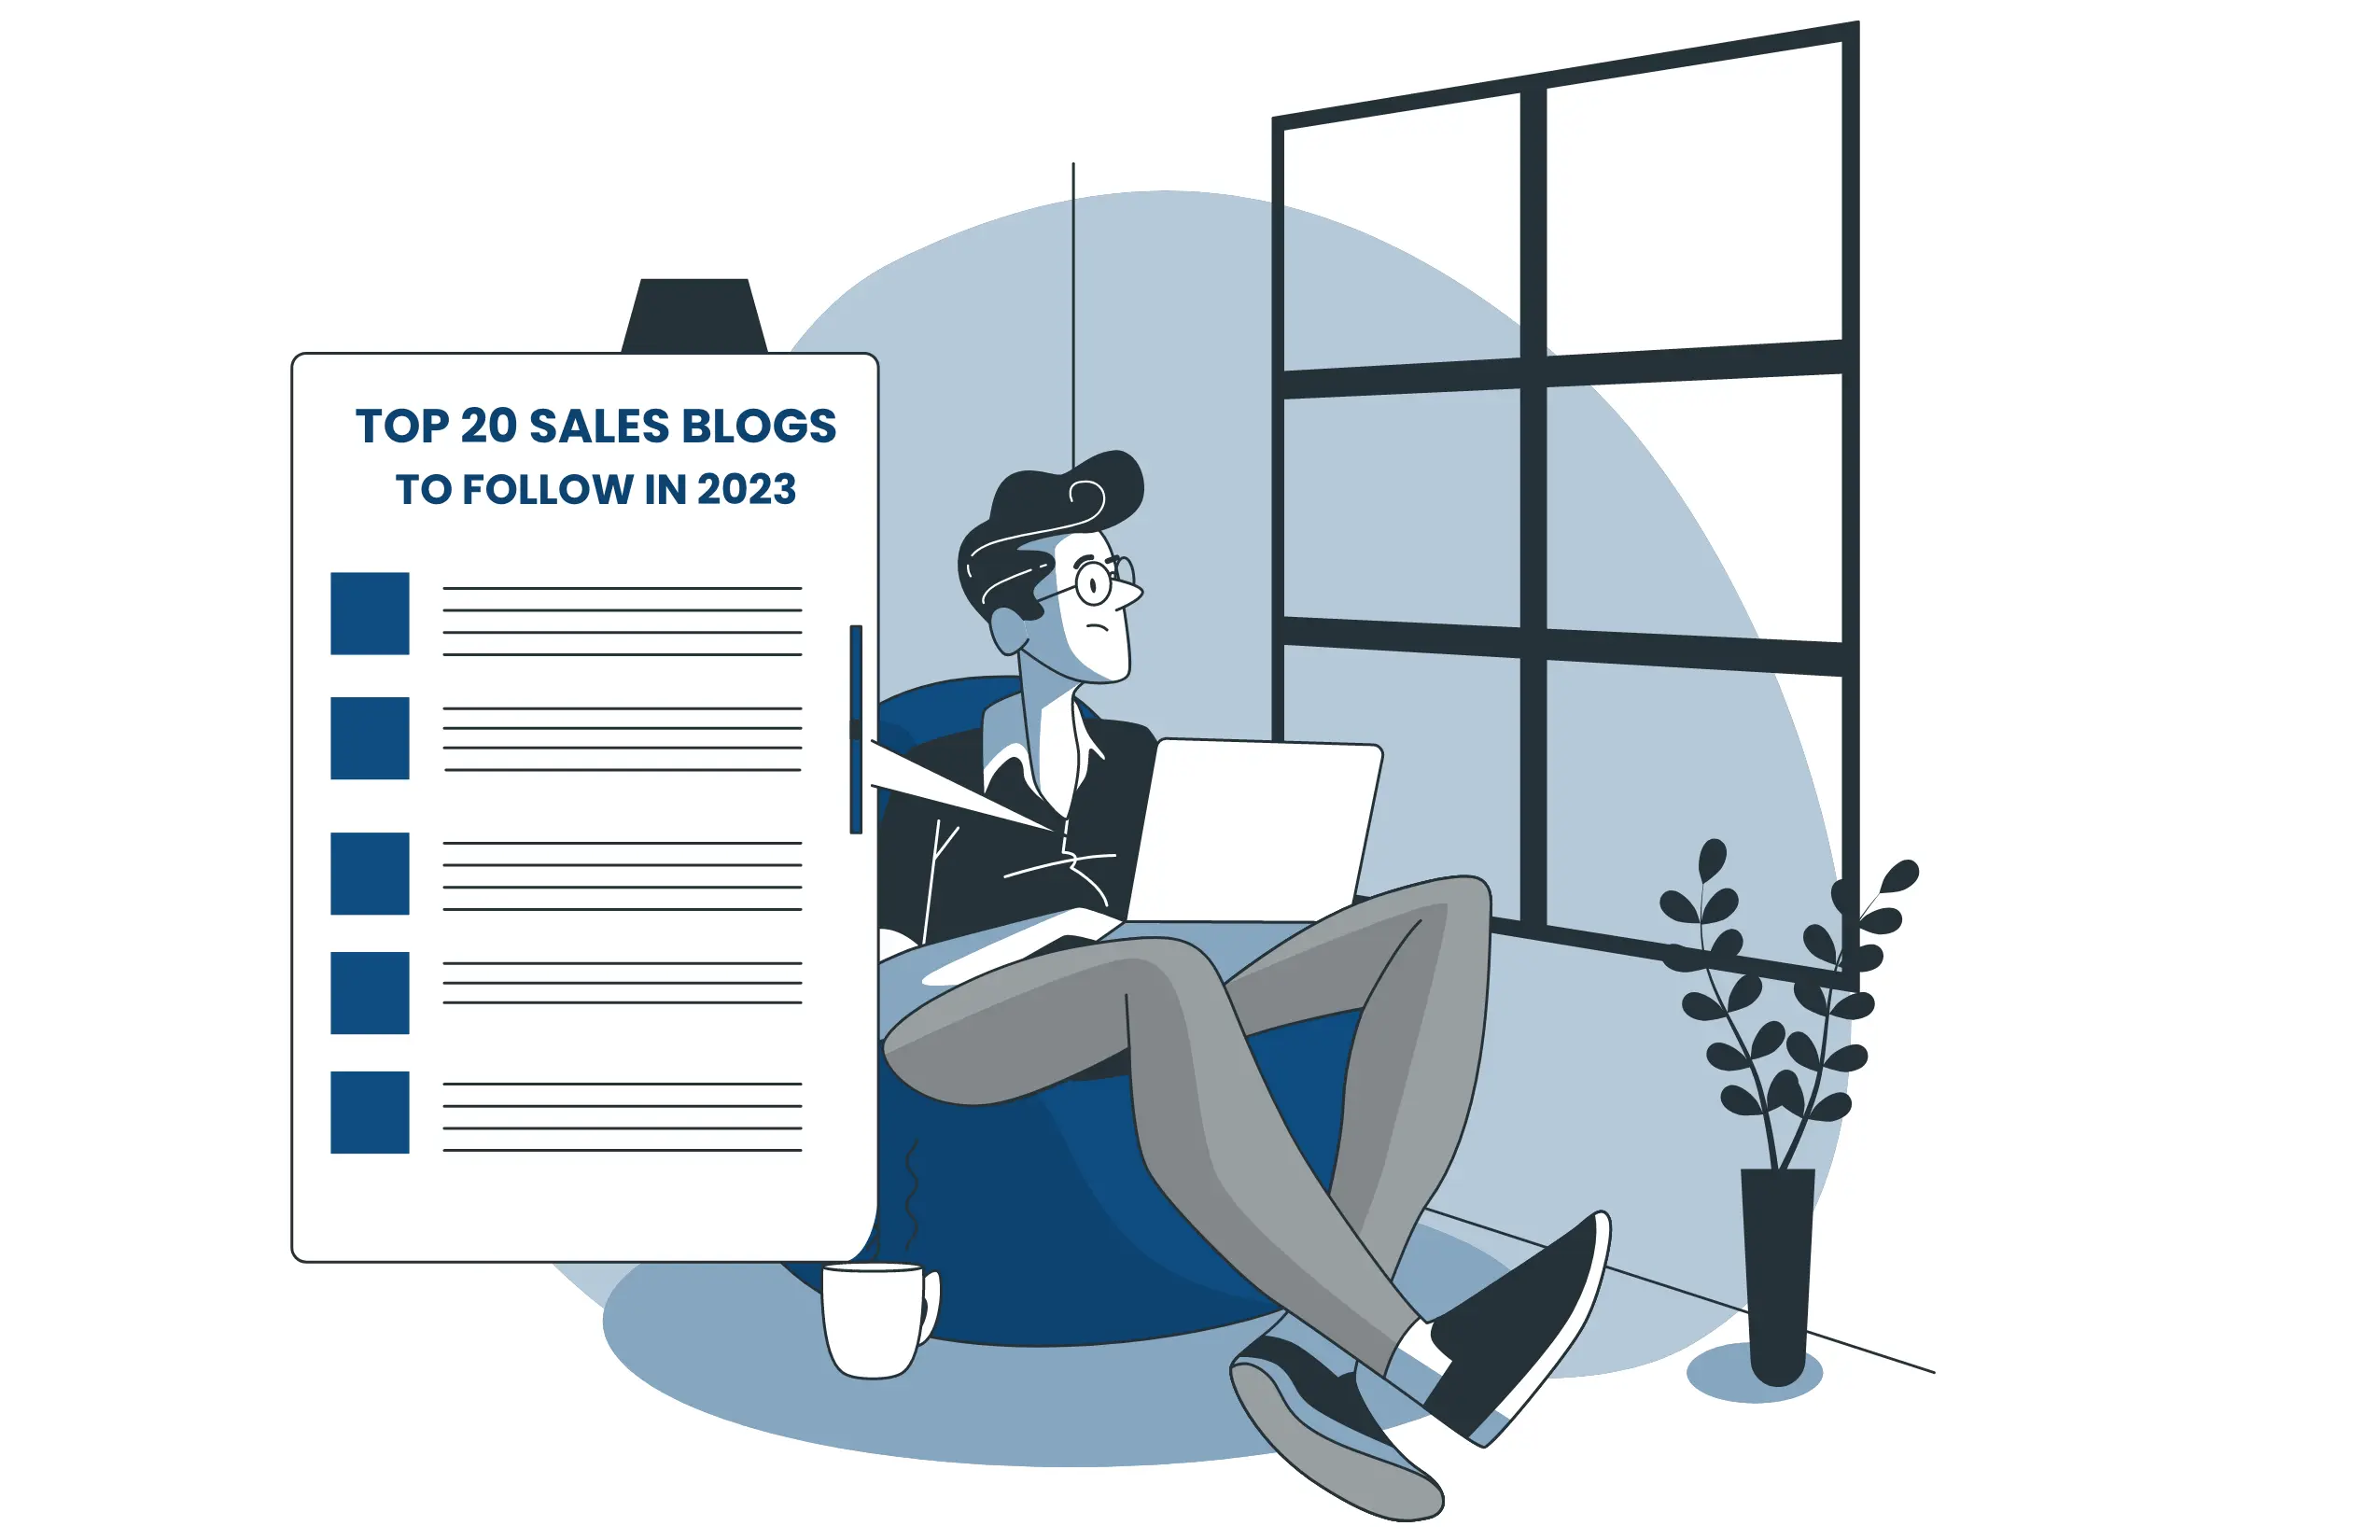 Top 20 sales blogs to follow in 2023